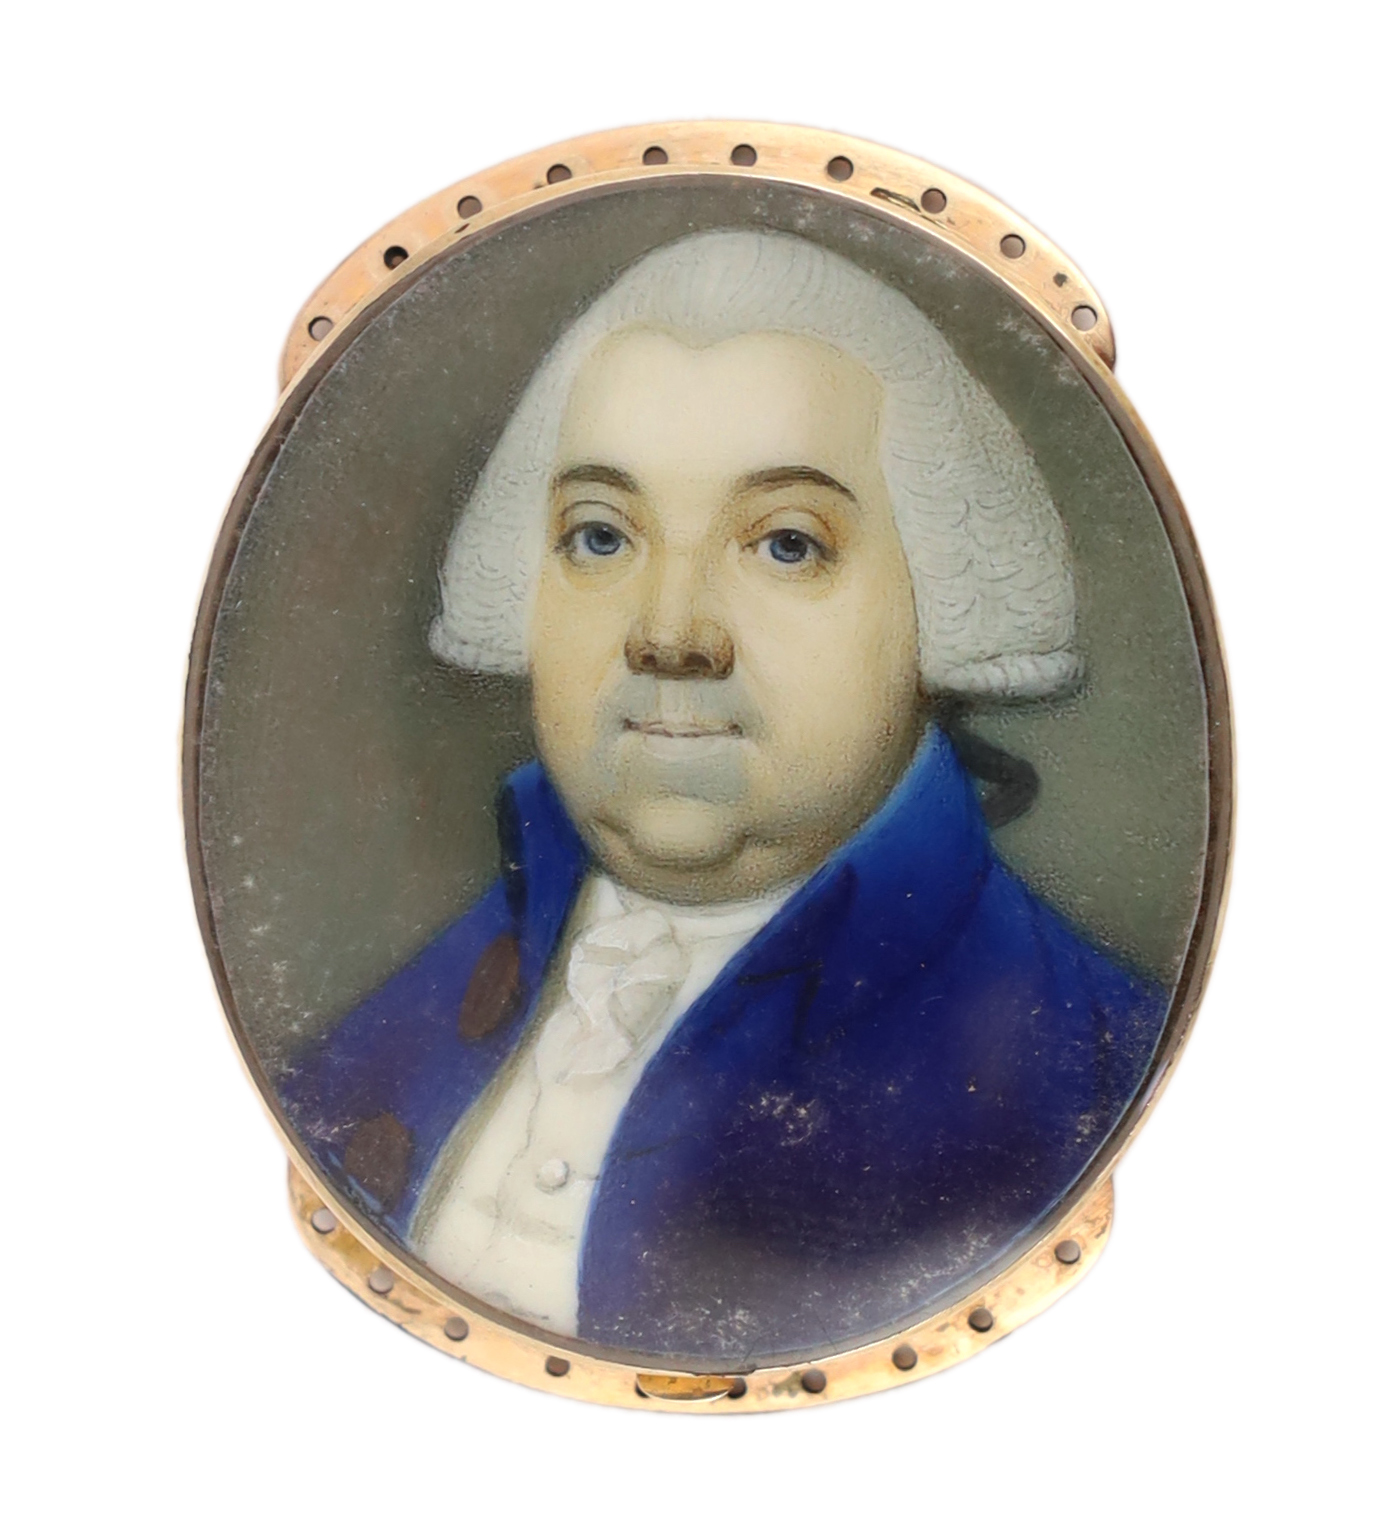 Jeremiah Meyer, R.A. (Anglo-German, 1735-1789), Portrait miniature of a gentleman, watercolour on ivory, 3.8 x 3.3cm. CITES Submission reference DTULEVK6